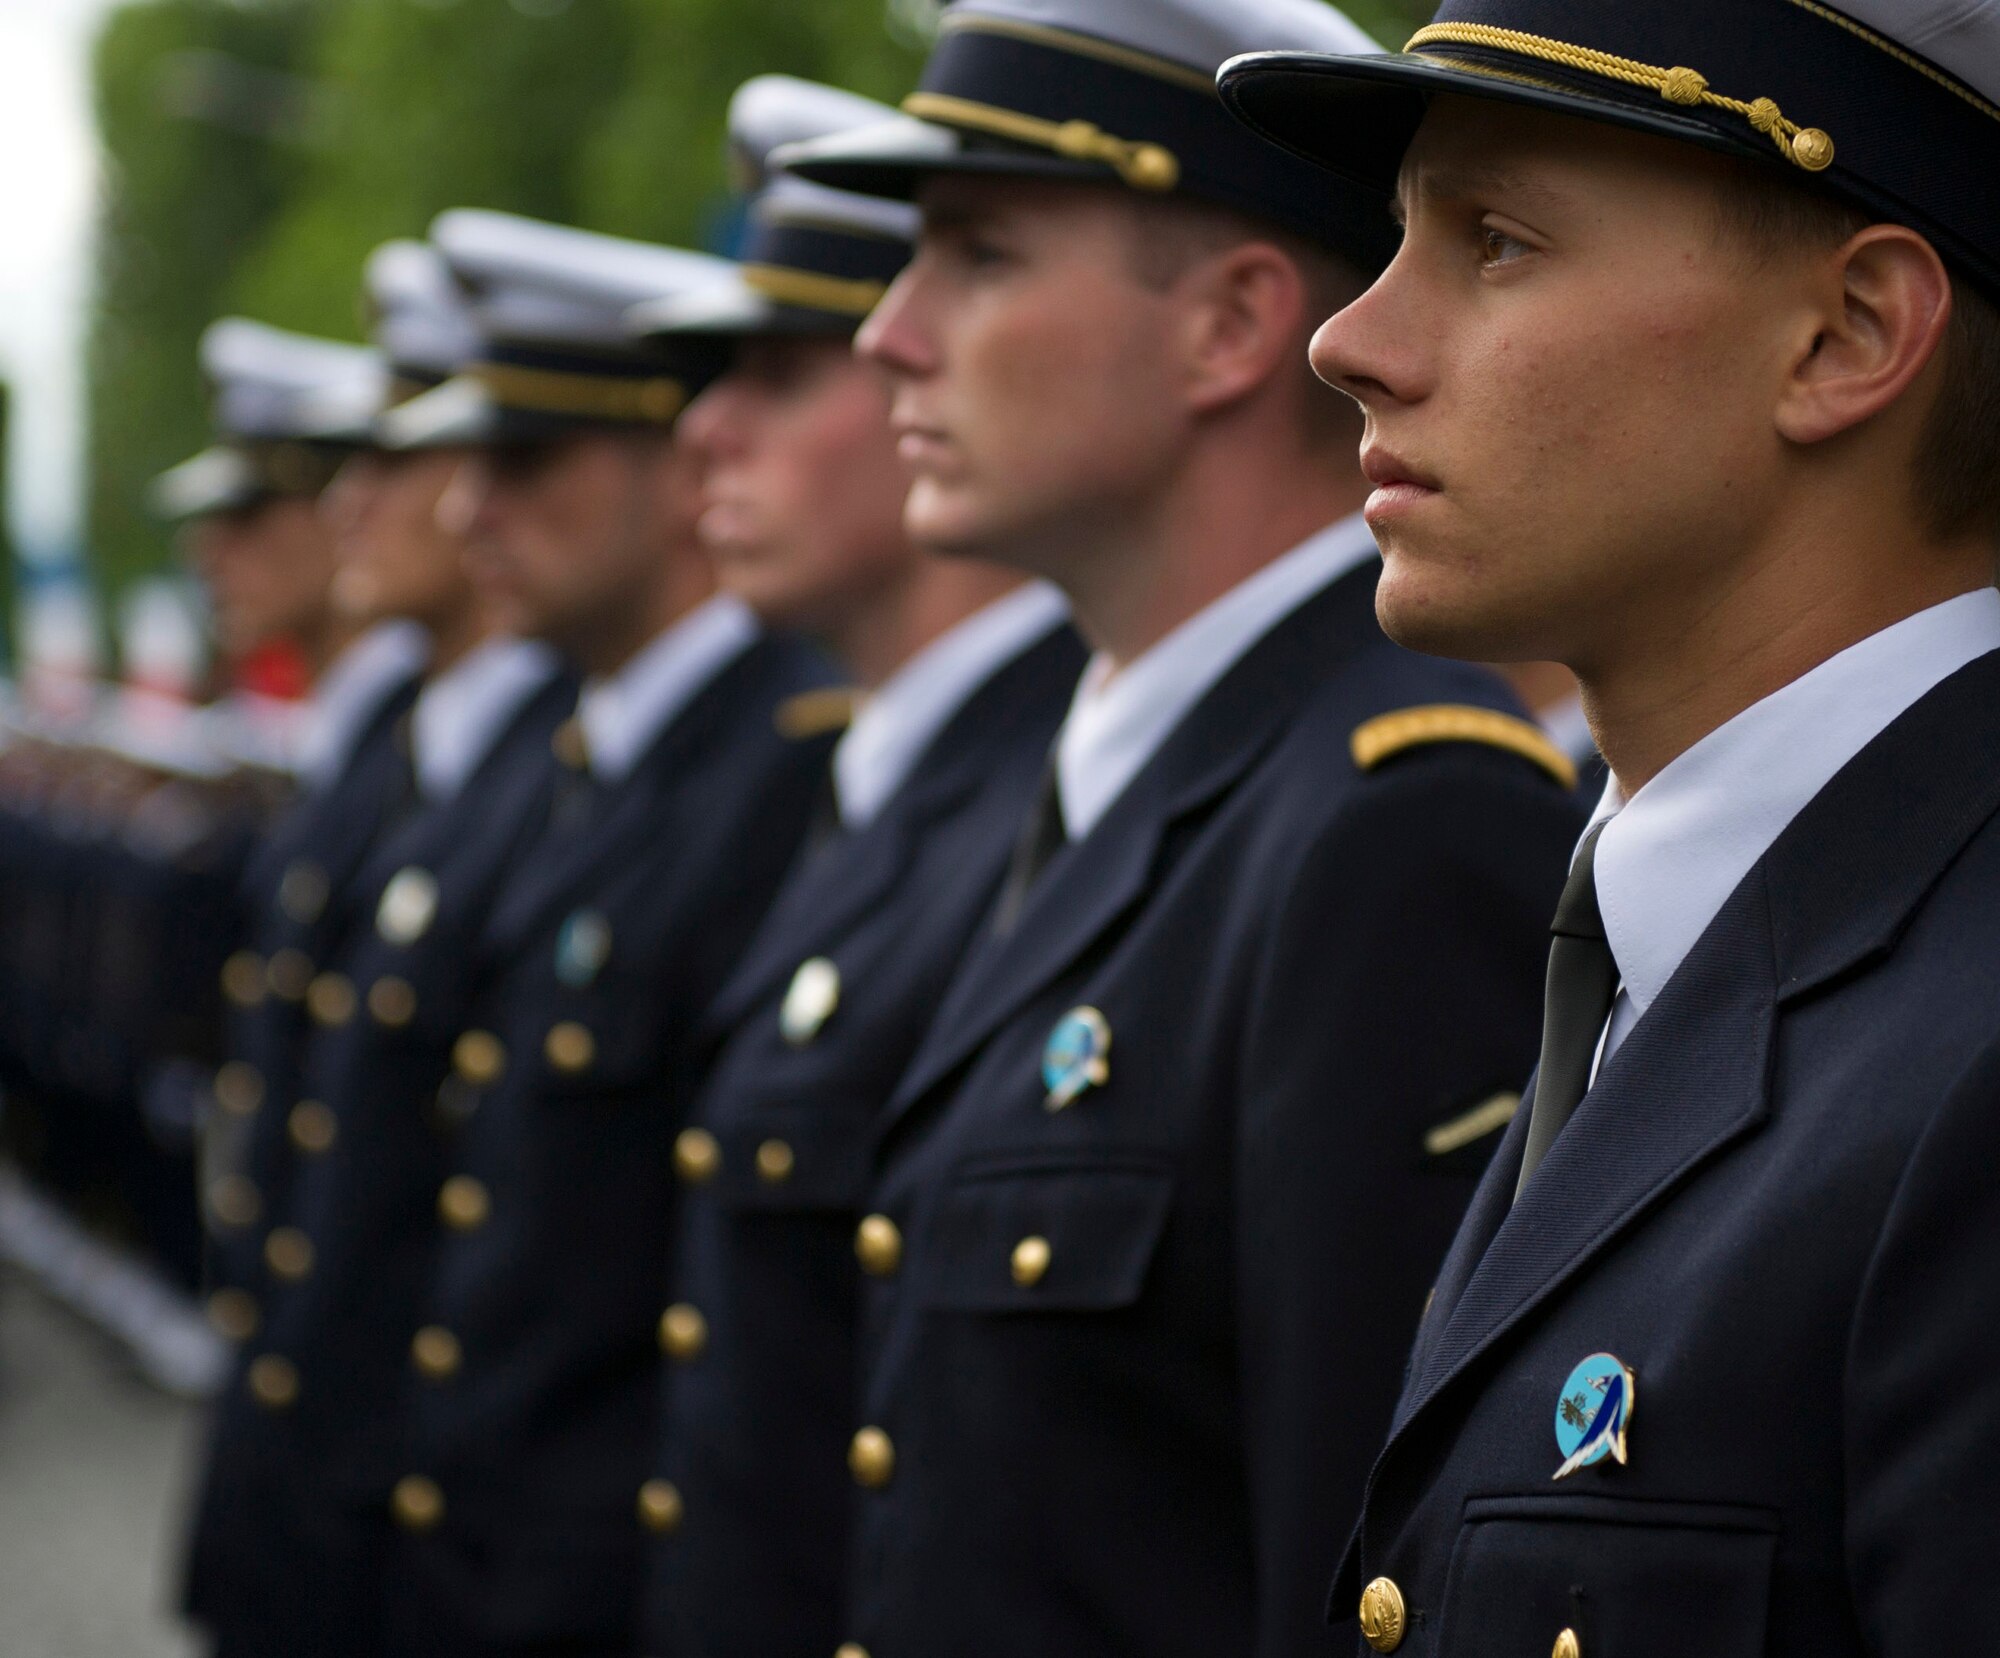 PARIS -- French air force cadets stand in formation before marching in the 2012, 14th of July parade in Paris. The 14th of July, known in English by Bastille Day, is the French equivalent of the American 4th of July. It commemorates the attack on the Bastille on July 14, 1989, which preceded the French revolution. (U.S. Air Force photo/Staff Sgt. Benjamin Wilson)